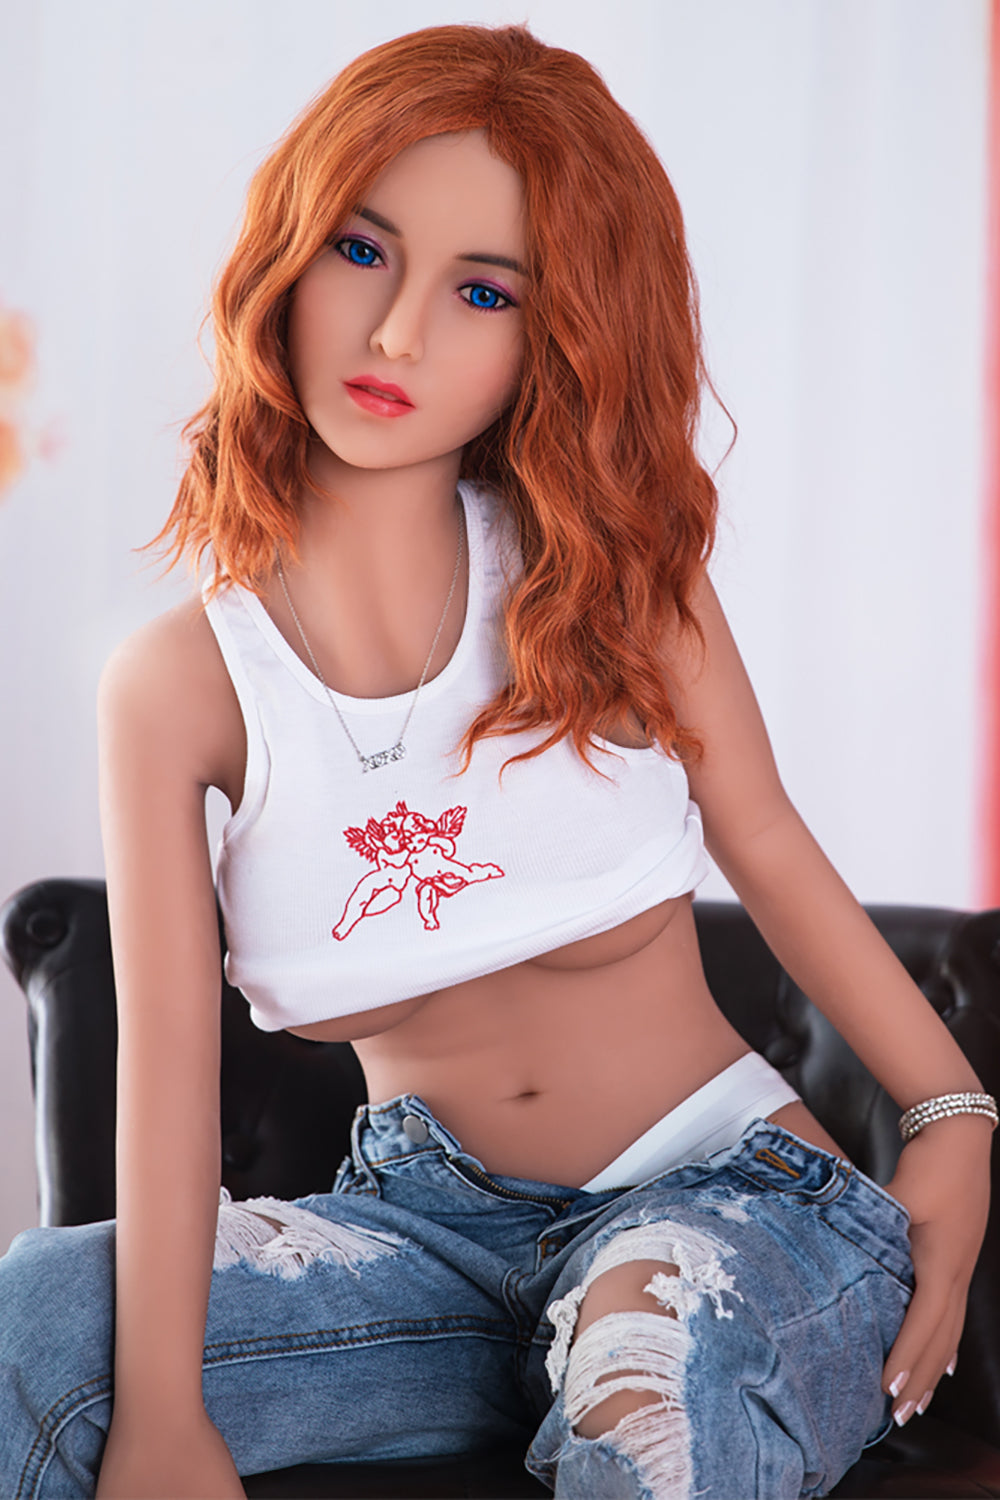 EU Stock - Haven 150cm 187# Head Tanned Skin Sexy Real Love Doll TPE Sex Doll